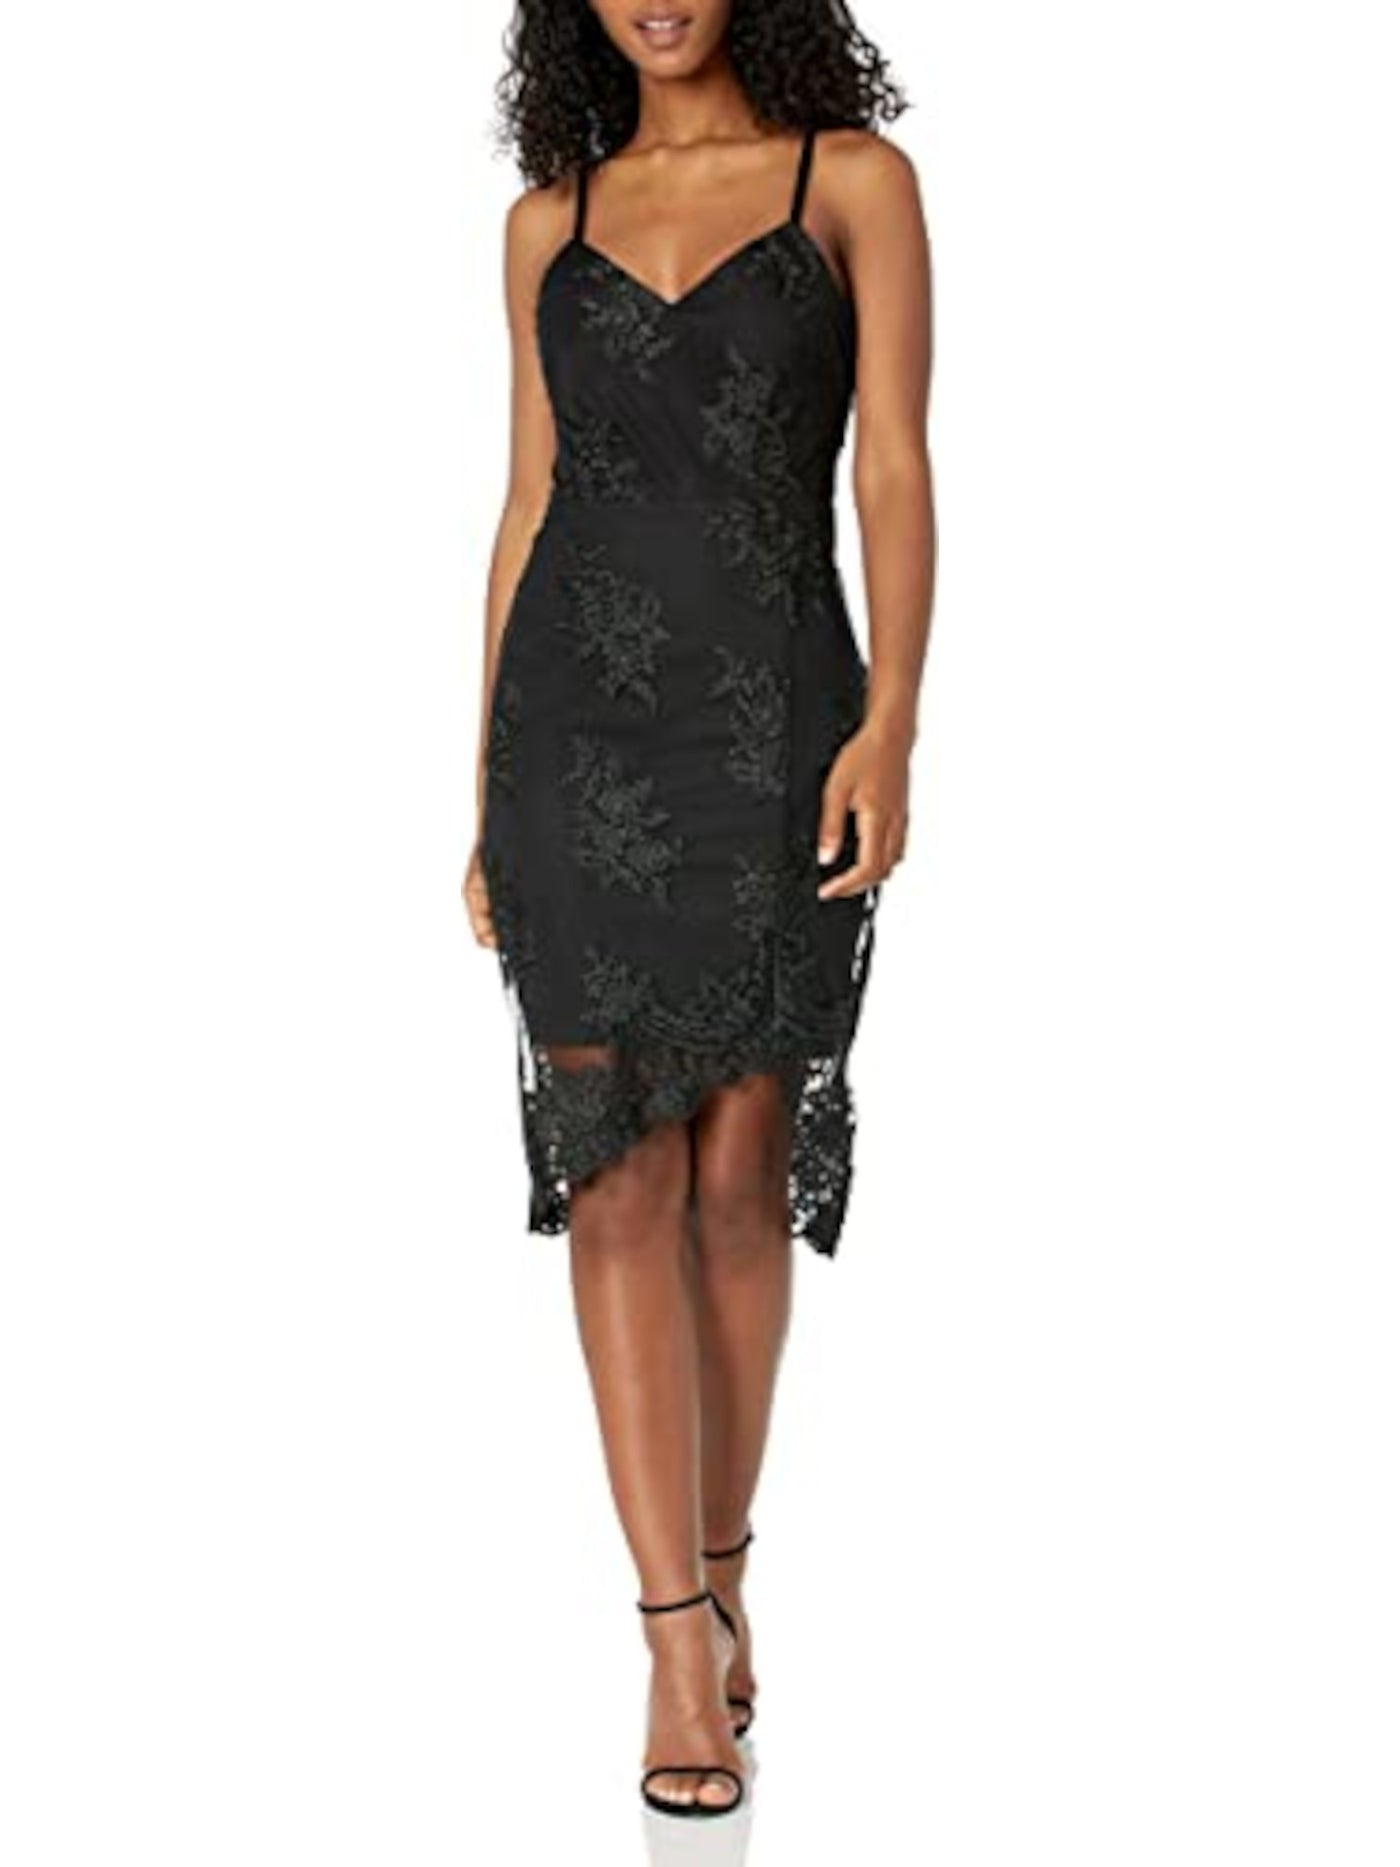 GUESS Womens Black Embroidered Lace Asymmetrical Spaghetti Strap V Neck Below The Knee Cocktail Sheath Dress 10